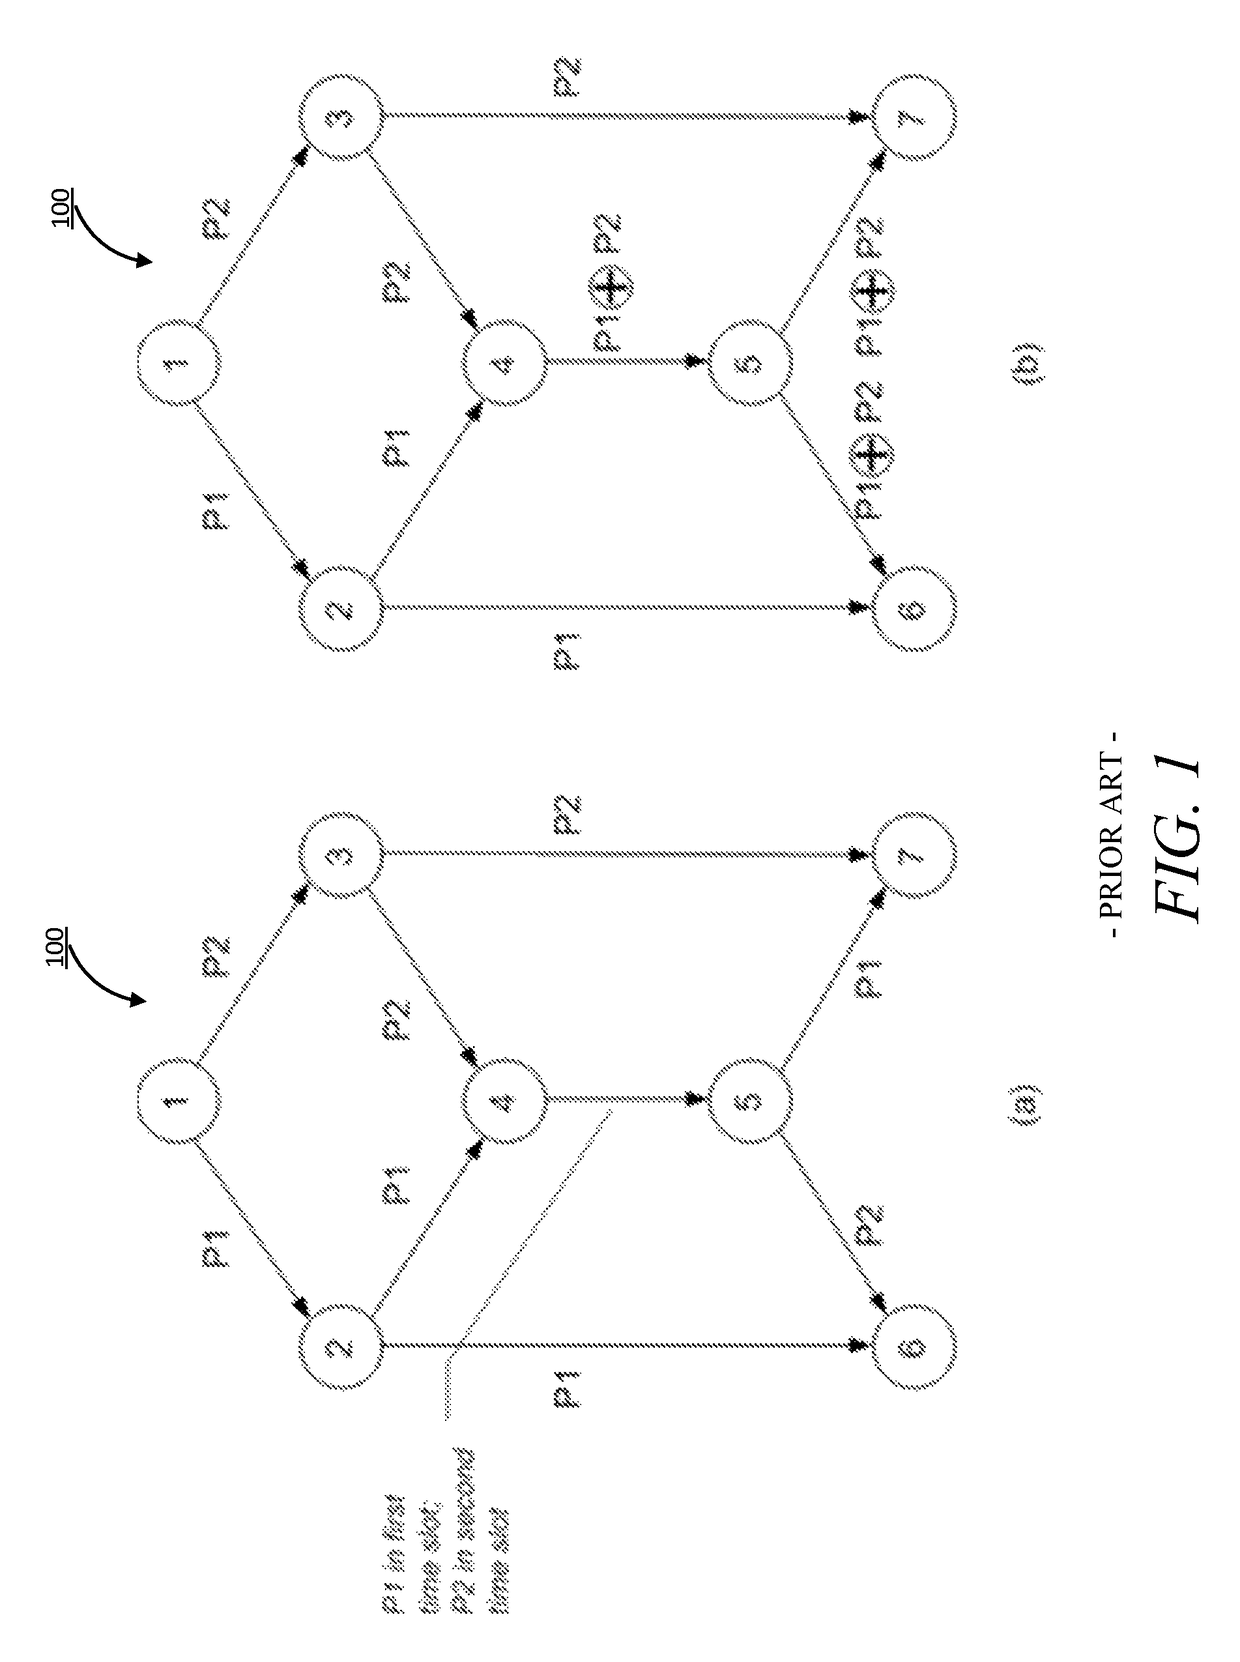 Wireless ad hoc network assembly using network coding